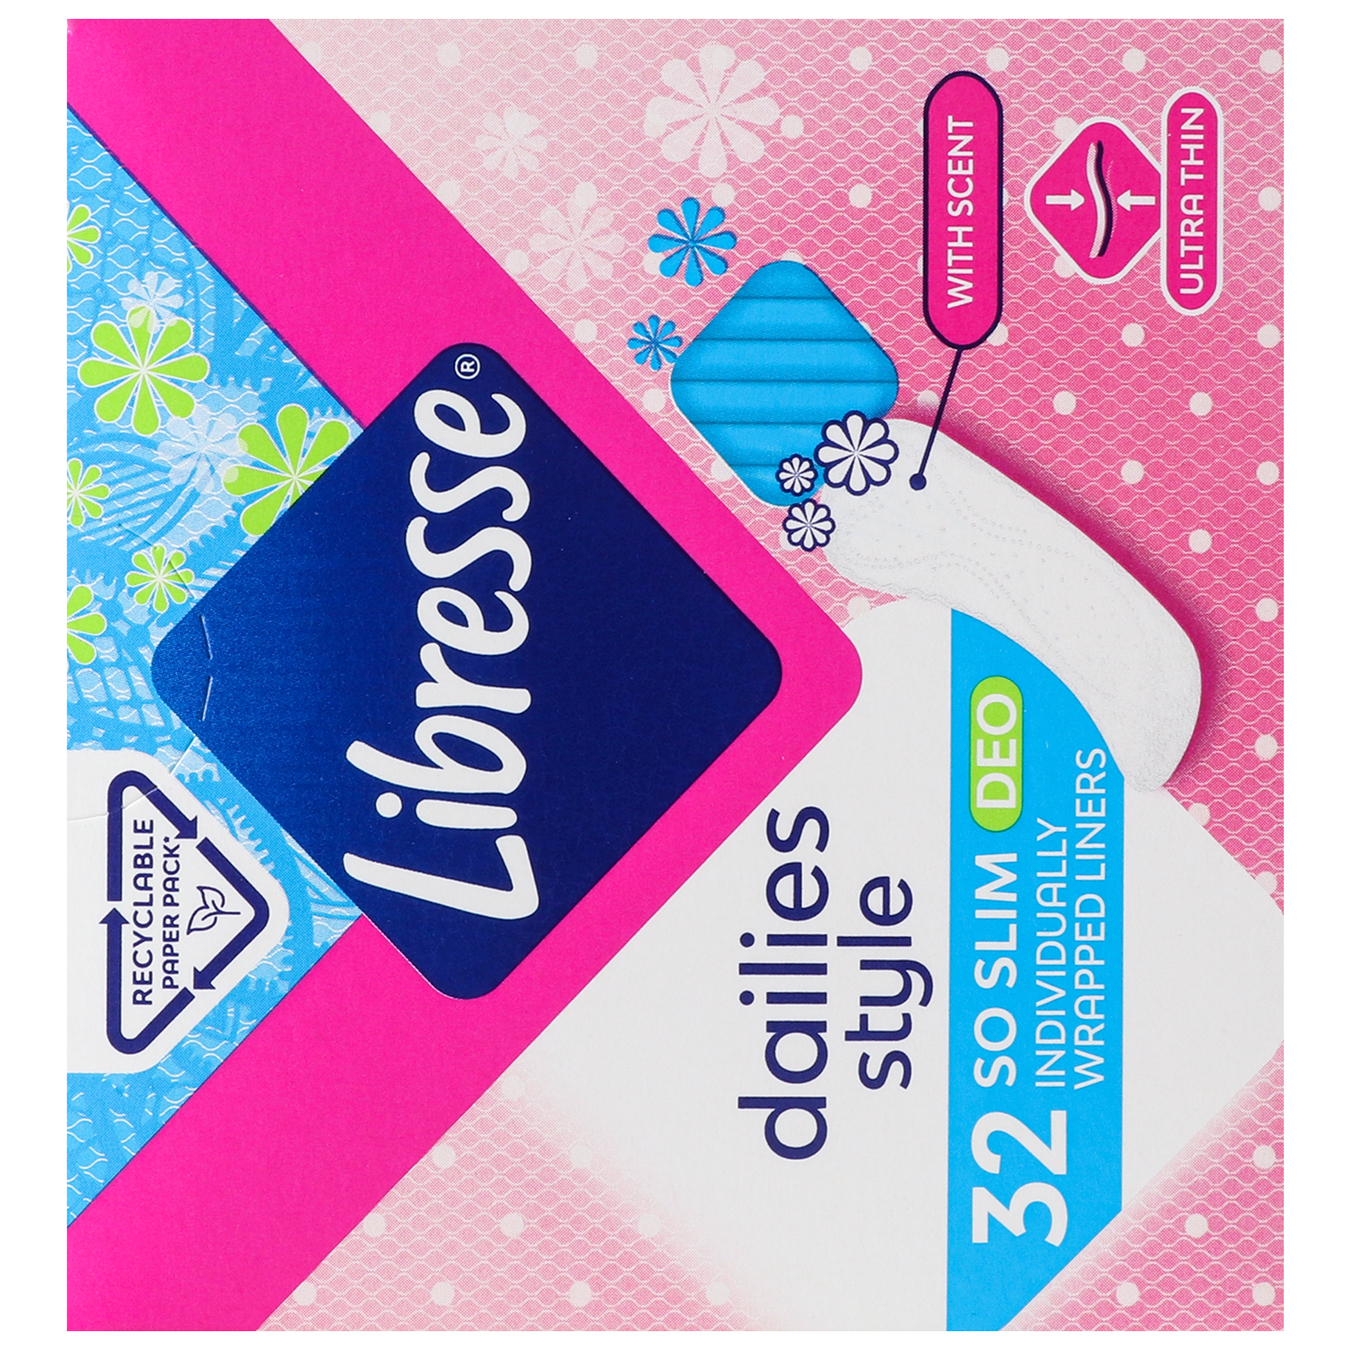 Libresse Daily Fresh Normal Deo hygienic pads 32pcs 4